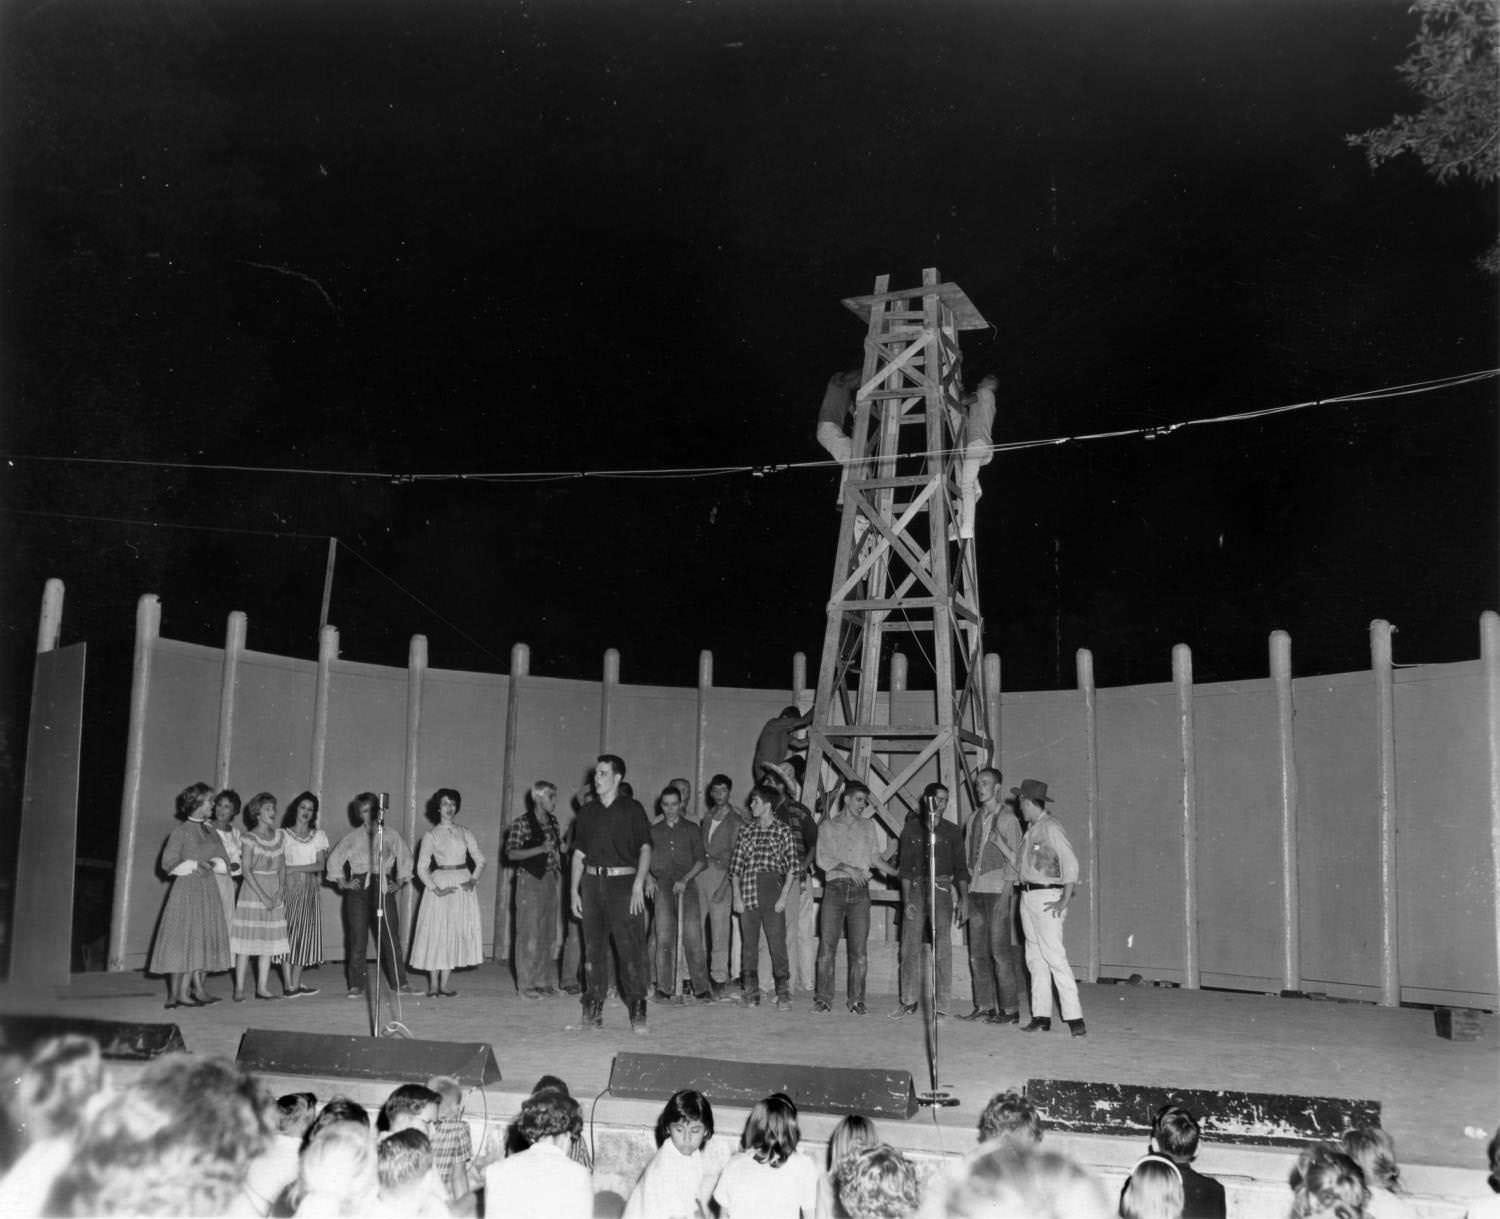 Wildcat performed on stage at Zilker Hillside Theater, 1962